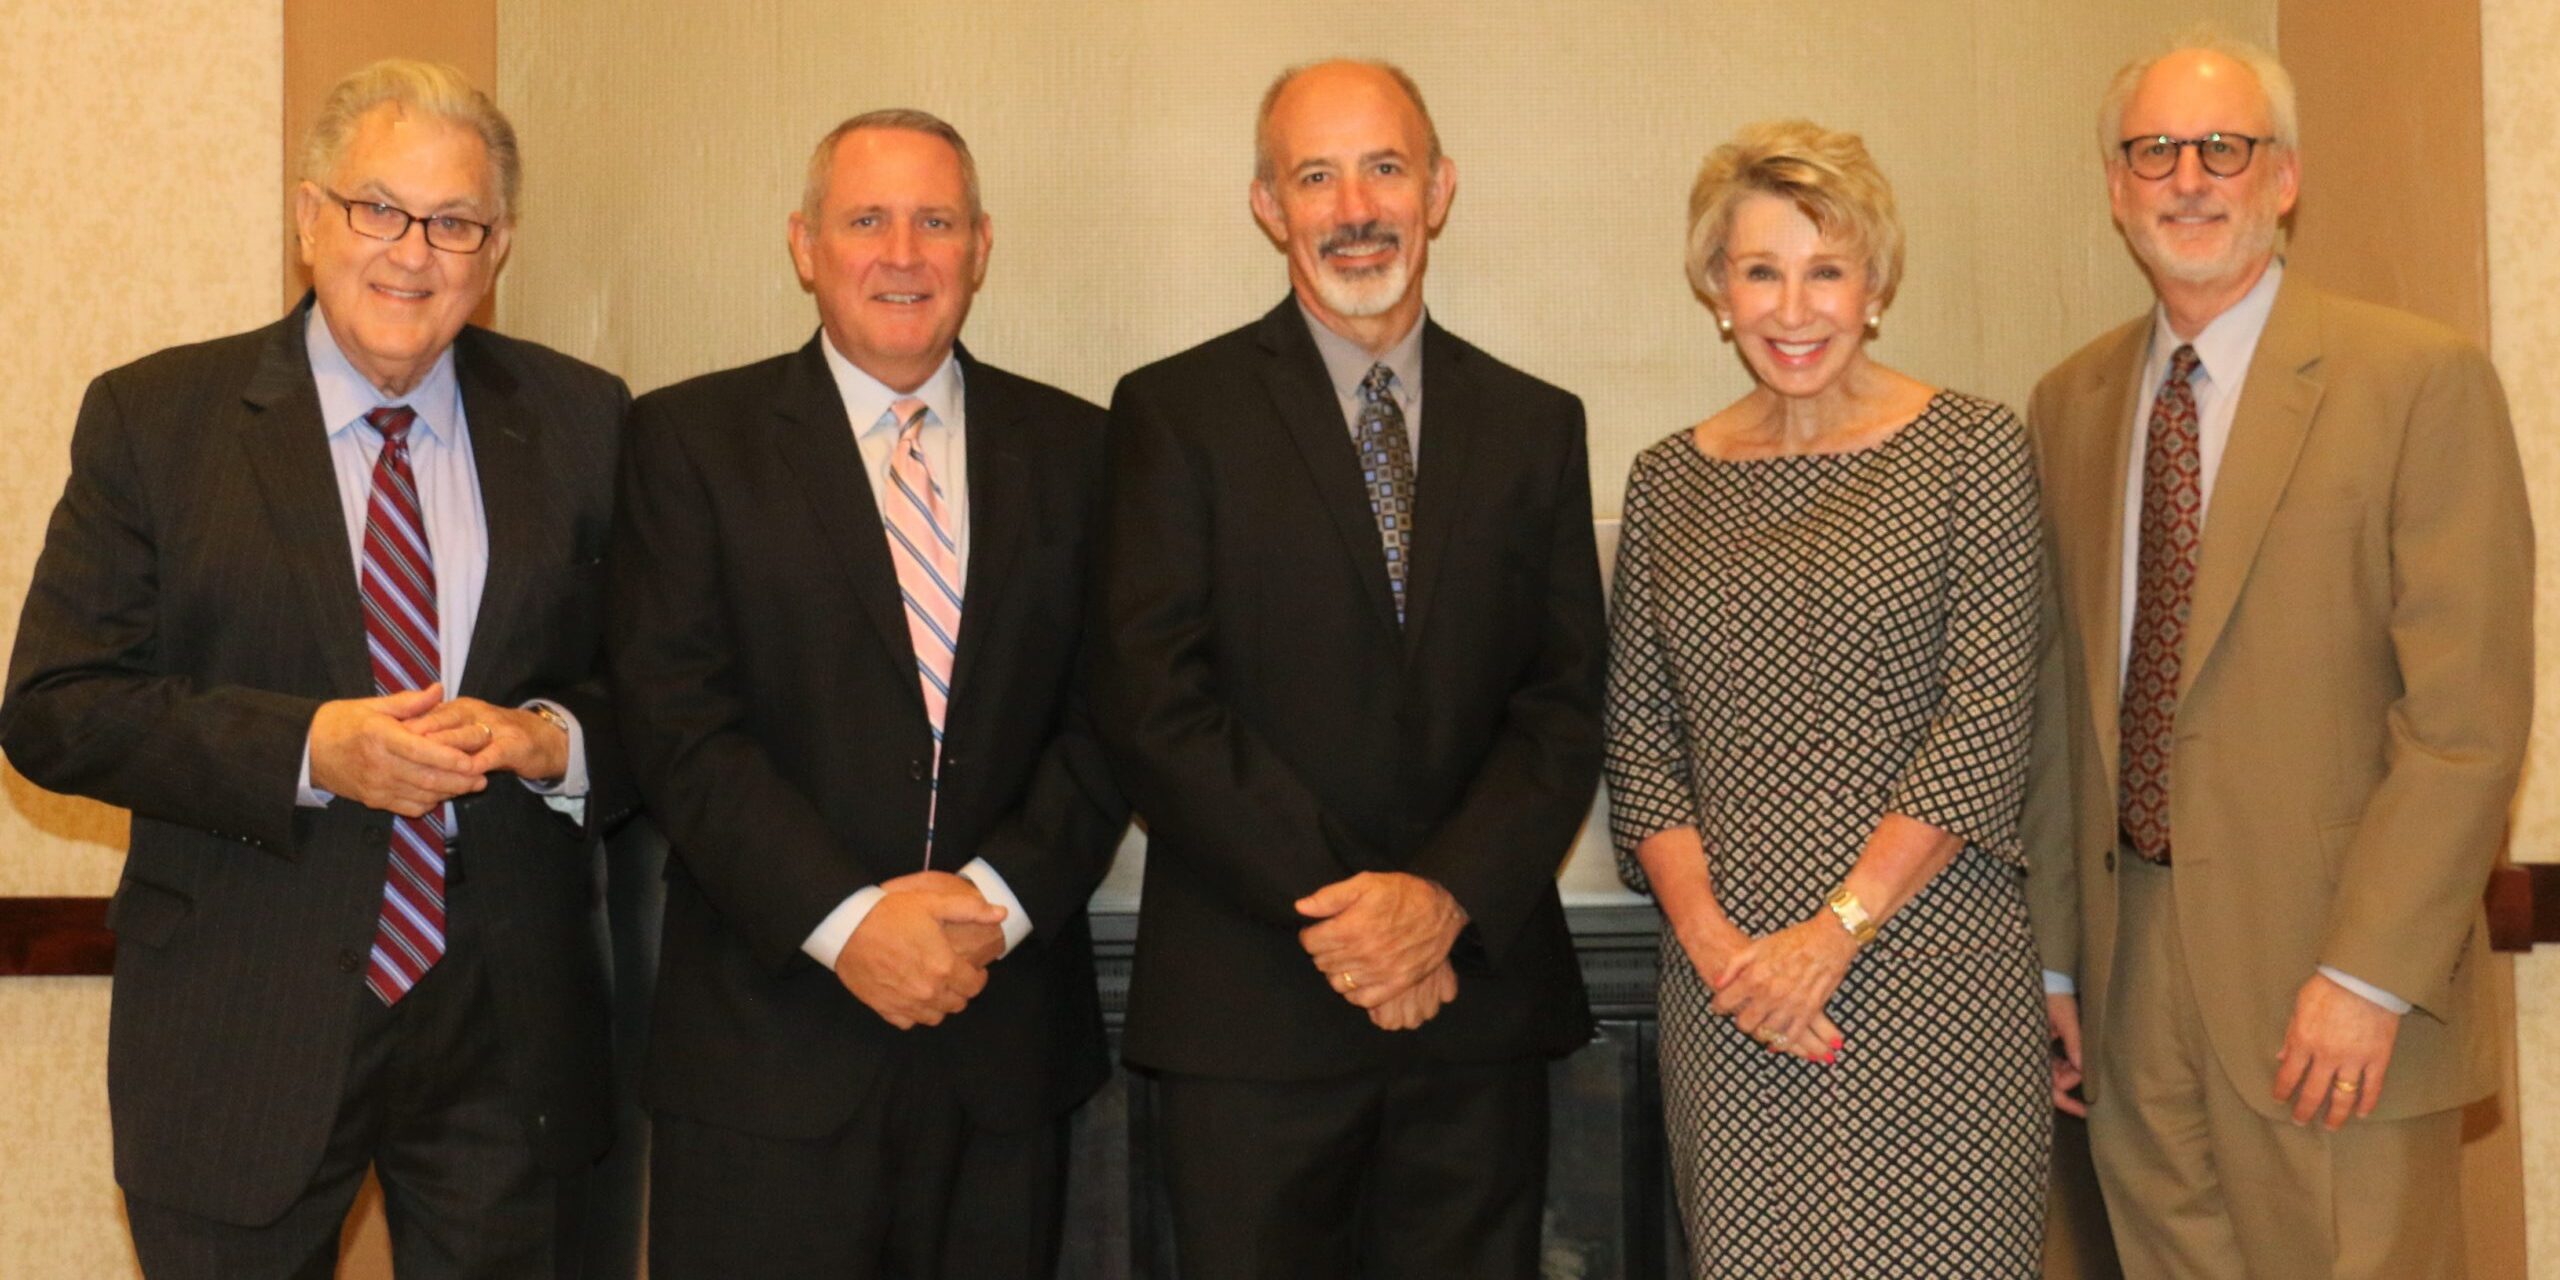 Members of OHFA's Board of Trustees include from left, Roger Beverage, member; Heath Collins, secretary-treasurer; Scott McLaws, vice-chair; Ann Felton Gilliland, member; and Michael Buhl, chair. Not pictured: Joi Love, resident board member.